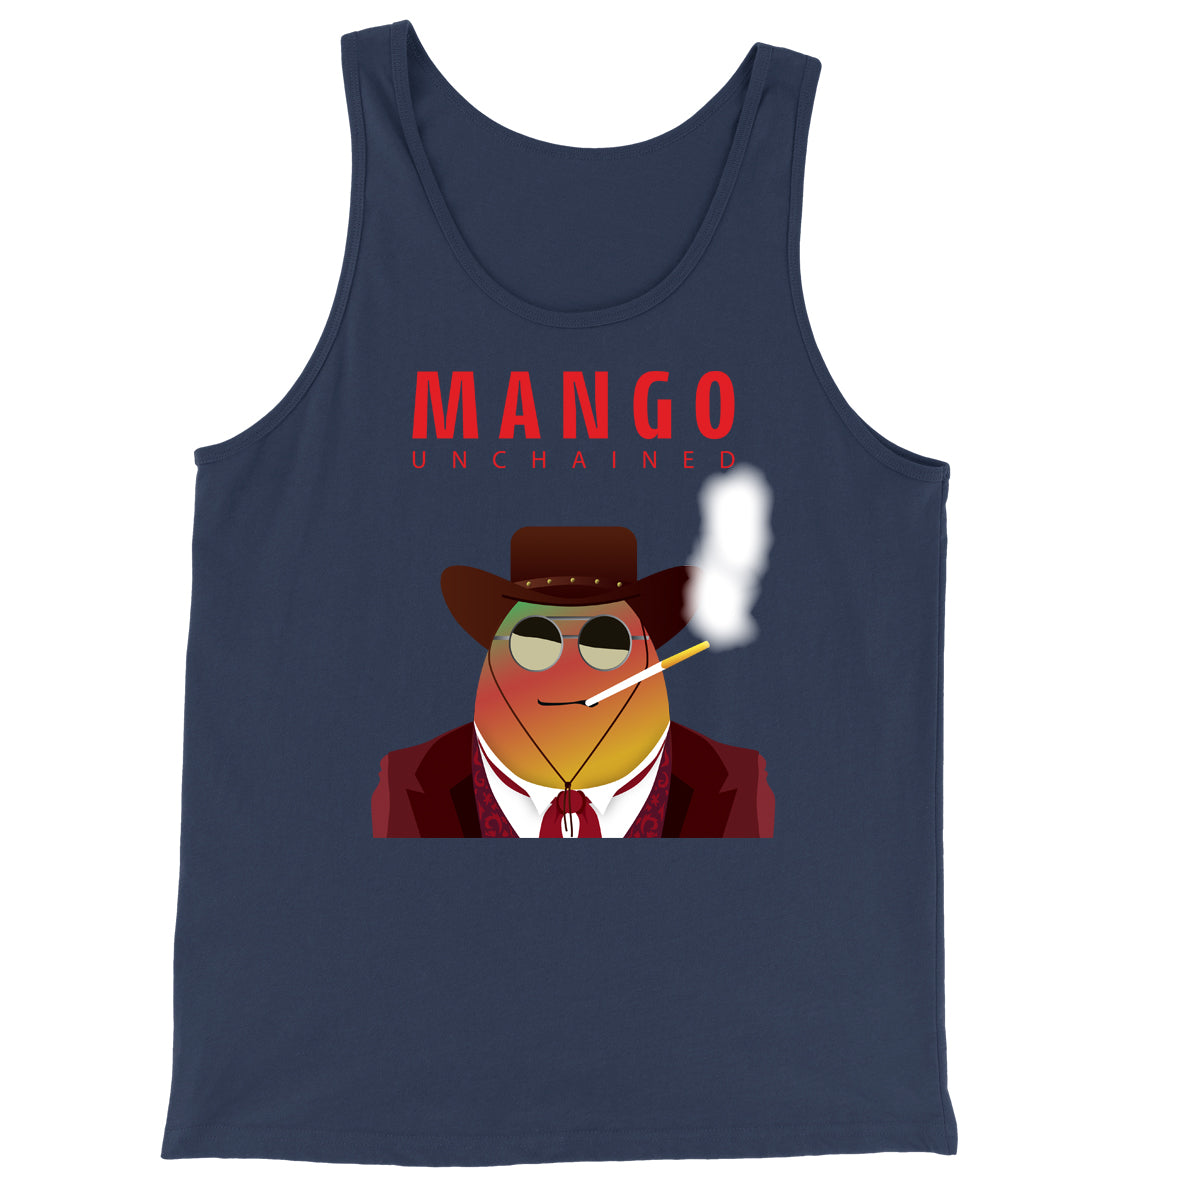 Movie The Food - Mango Unchained Tank Top - Navy